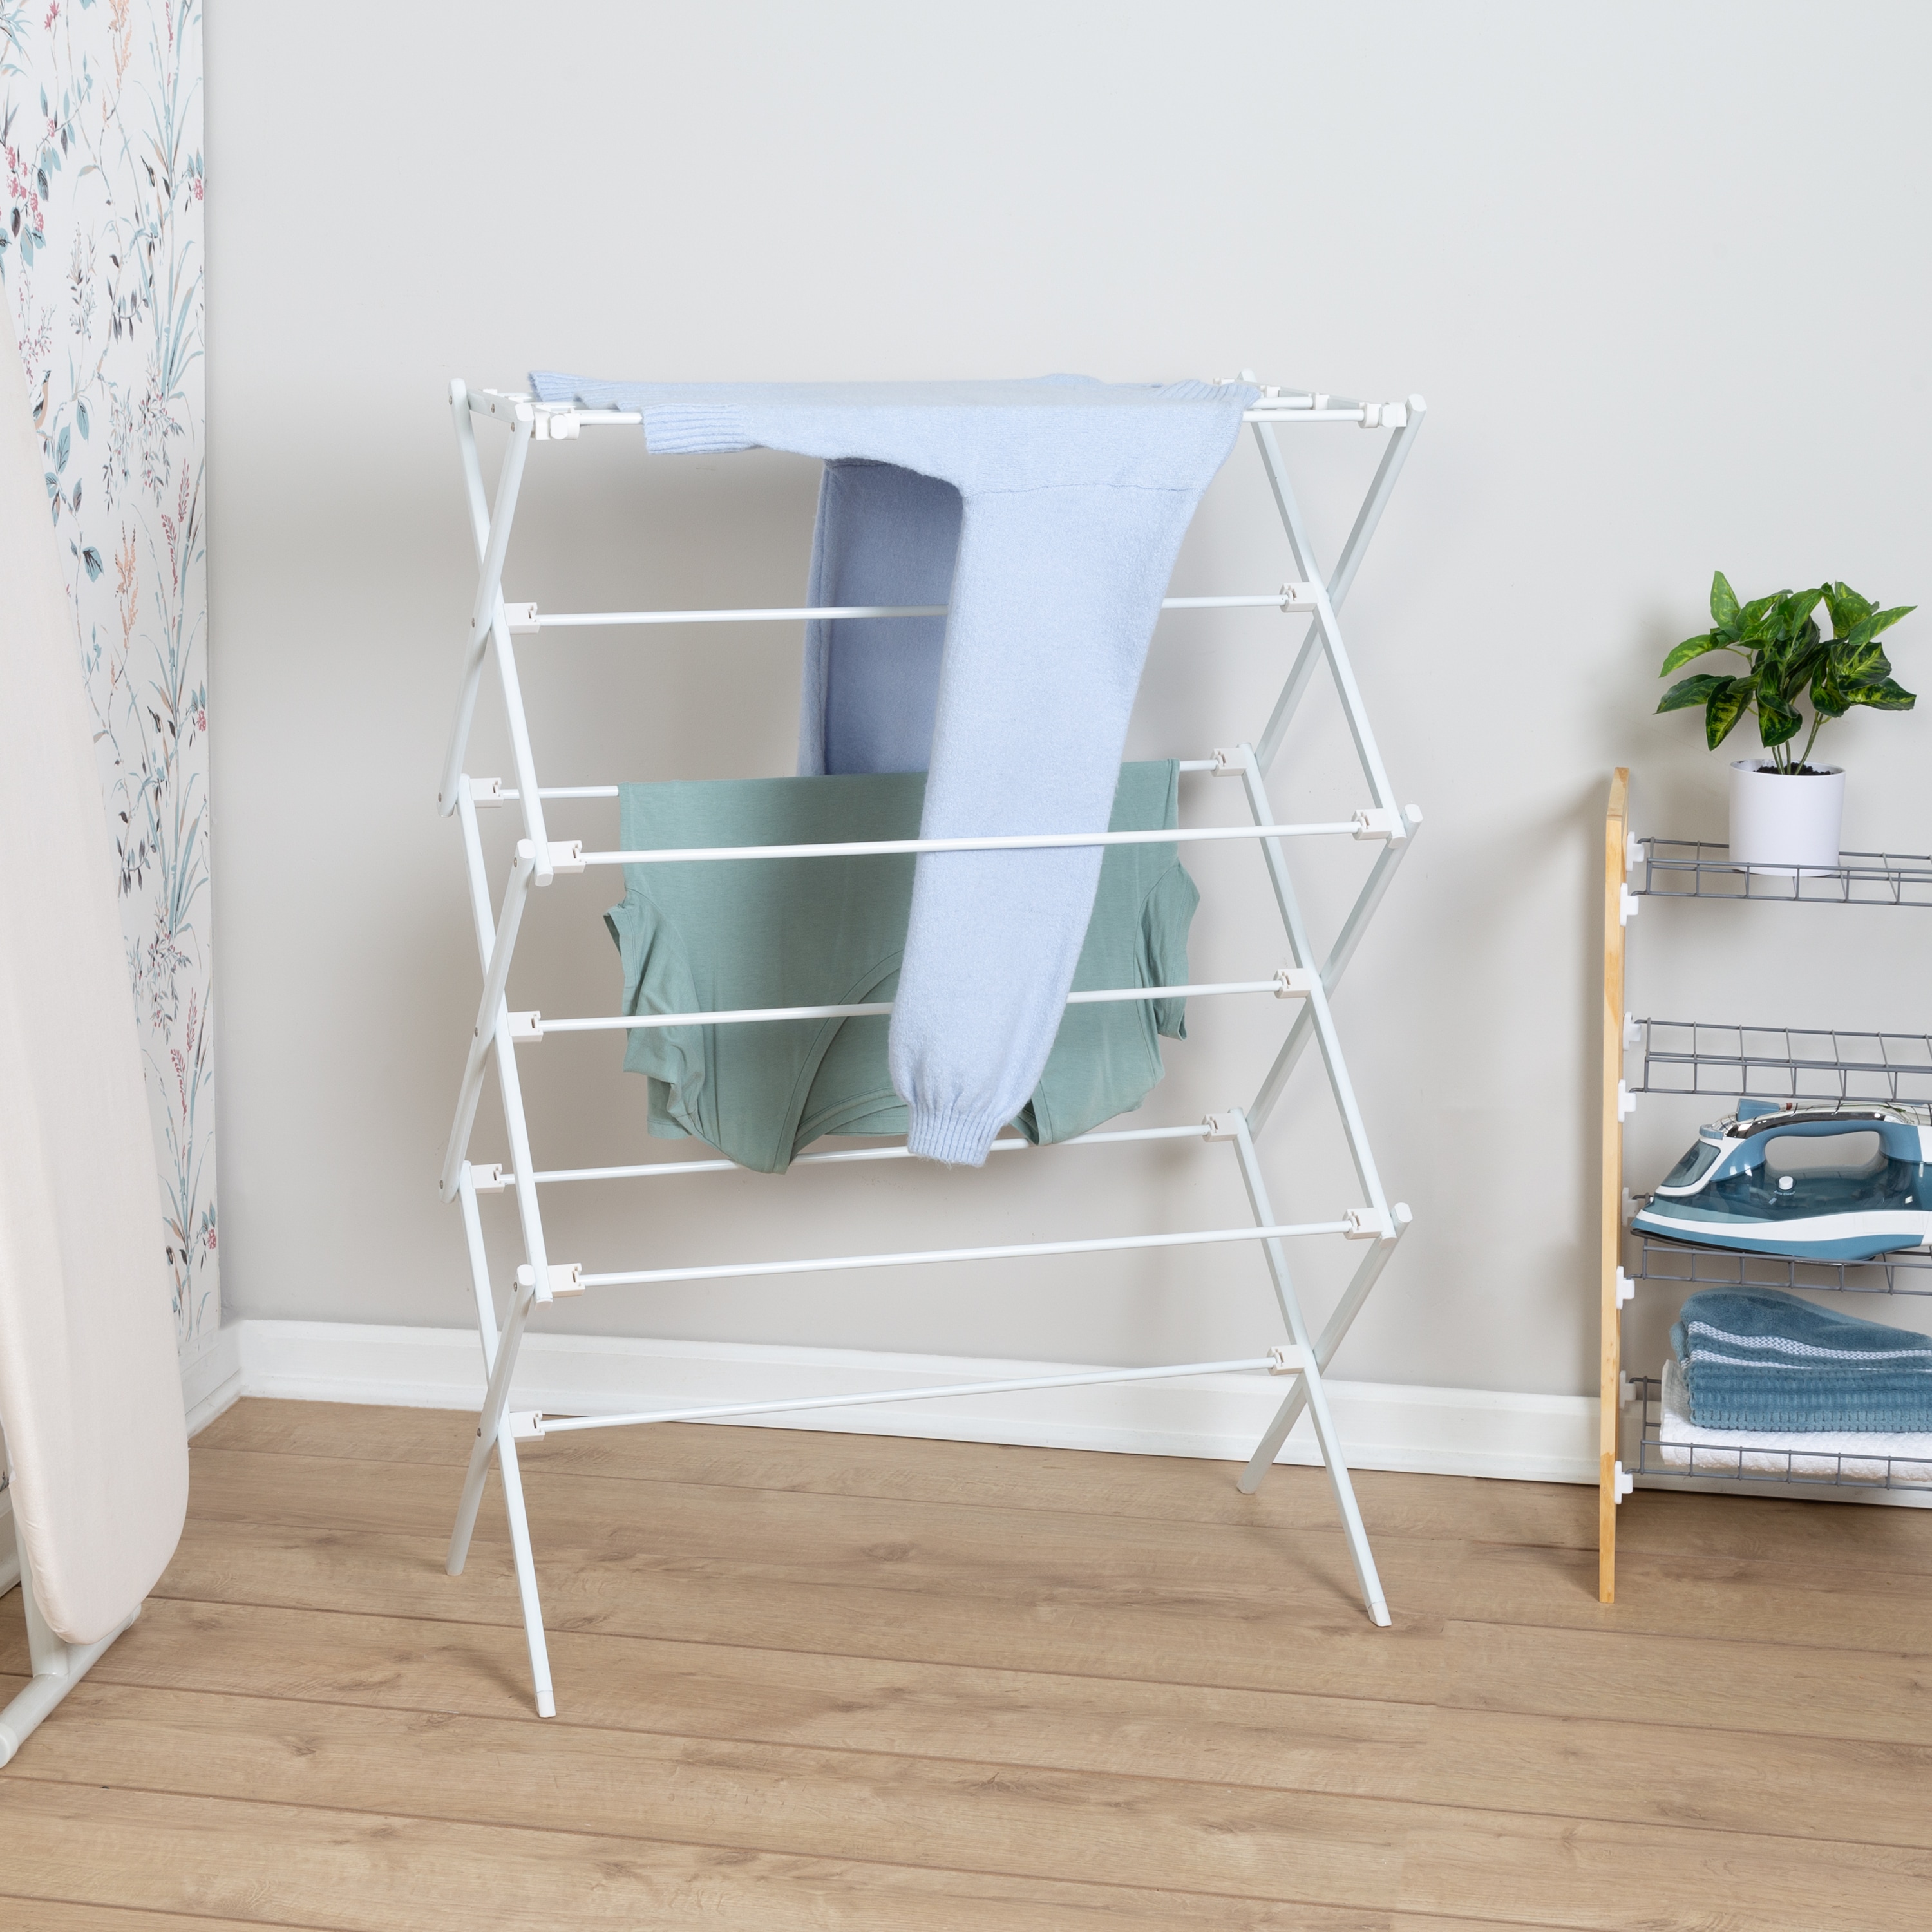 Premium Wooden Clothes Drying Rack - Large